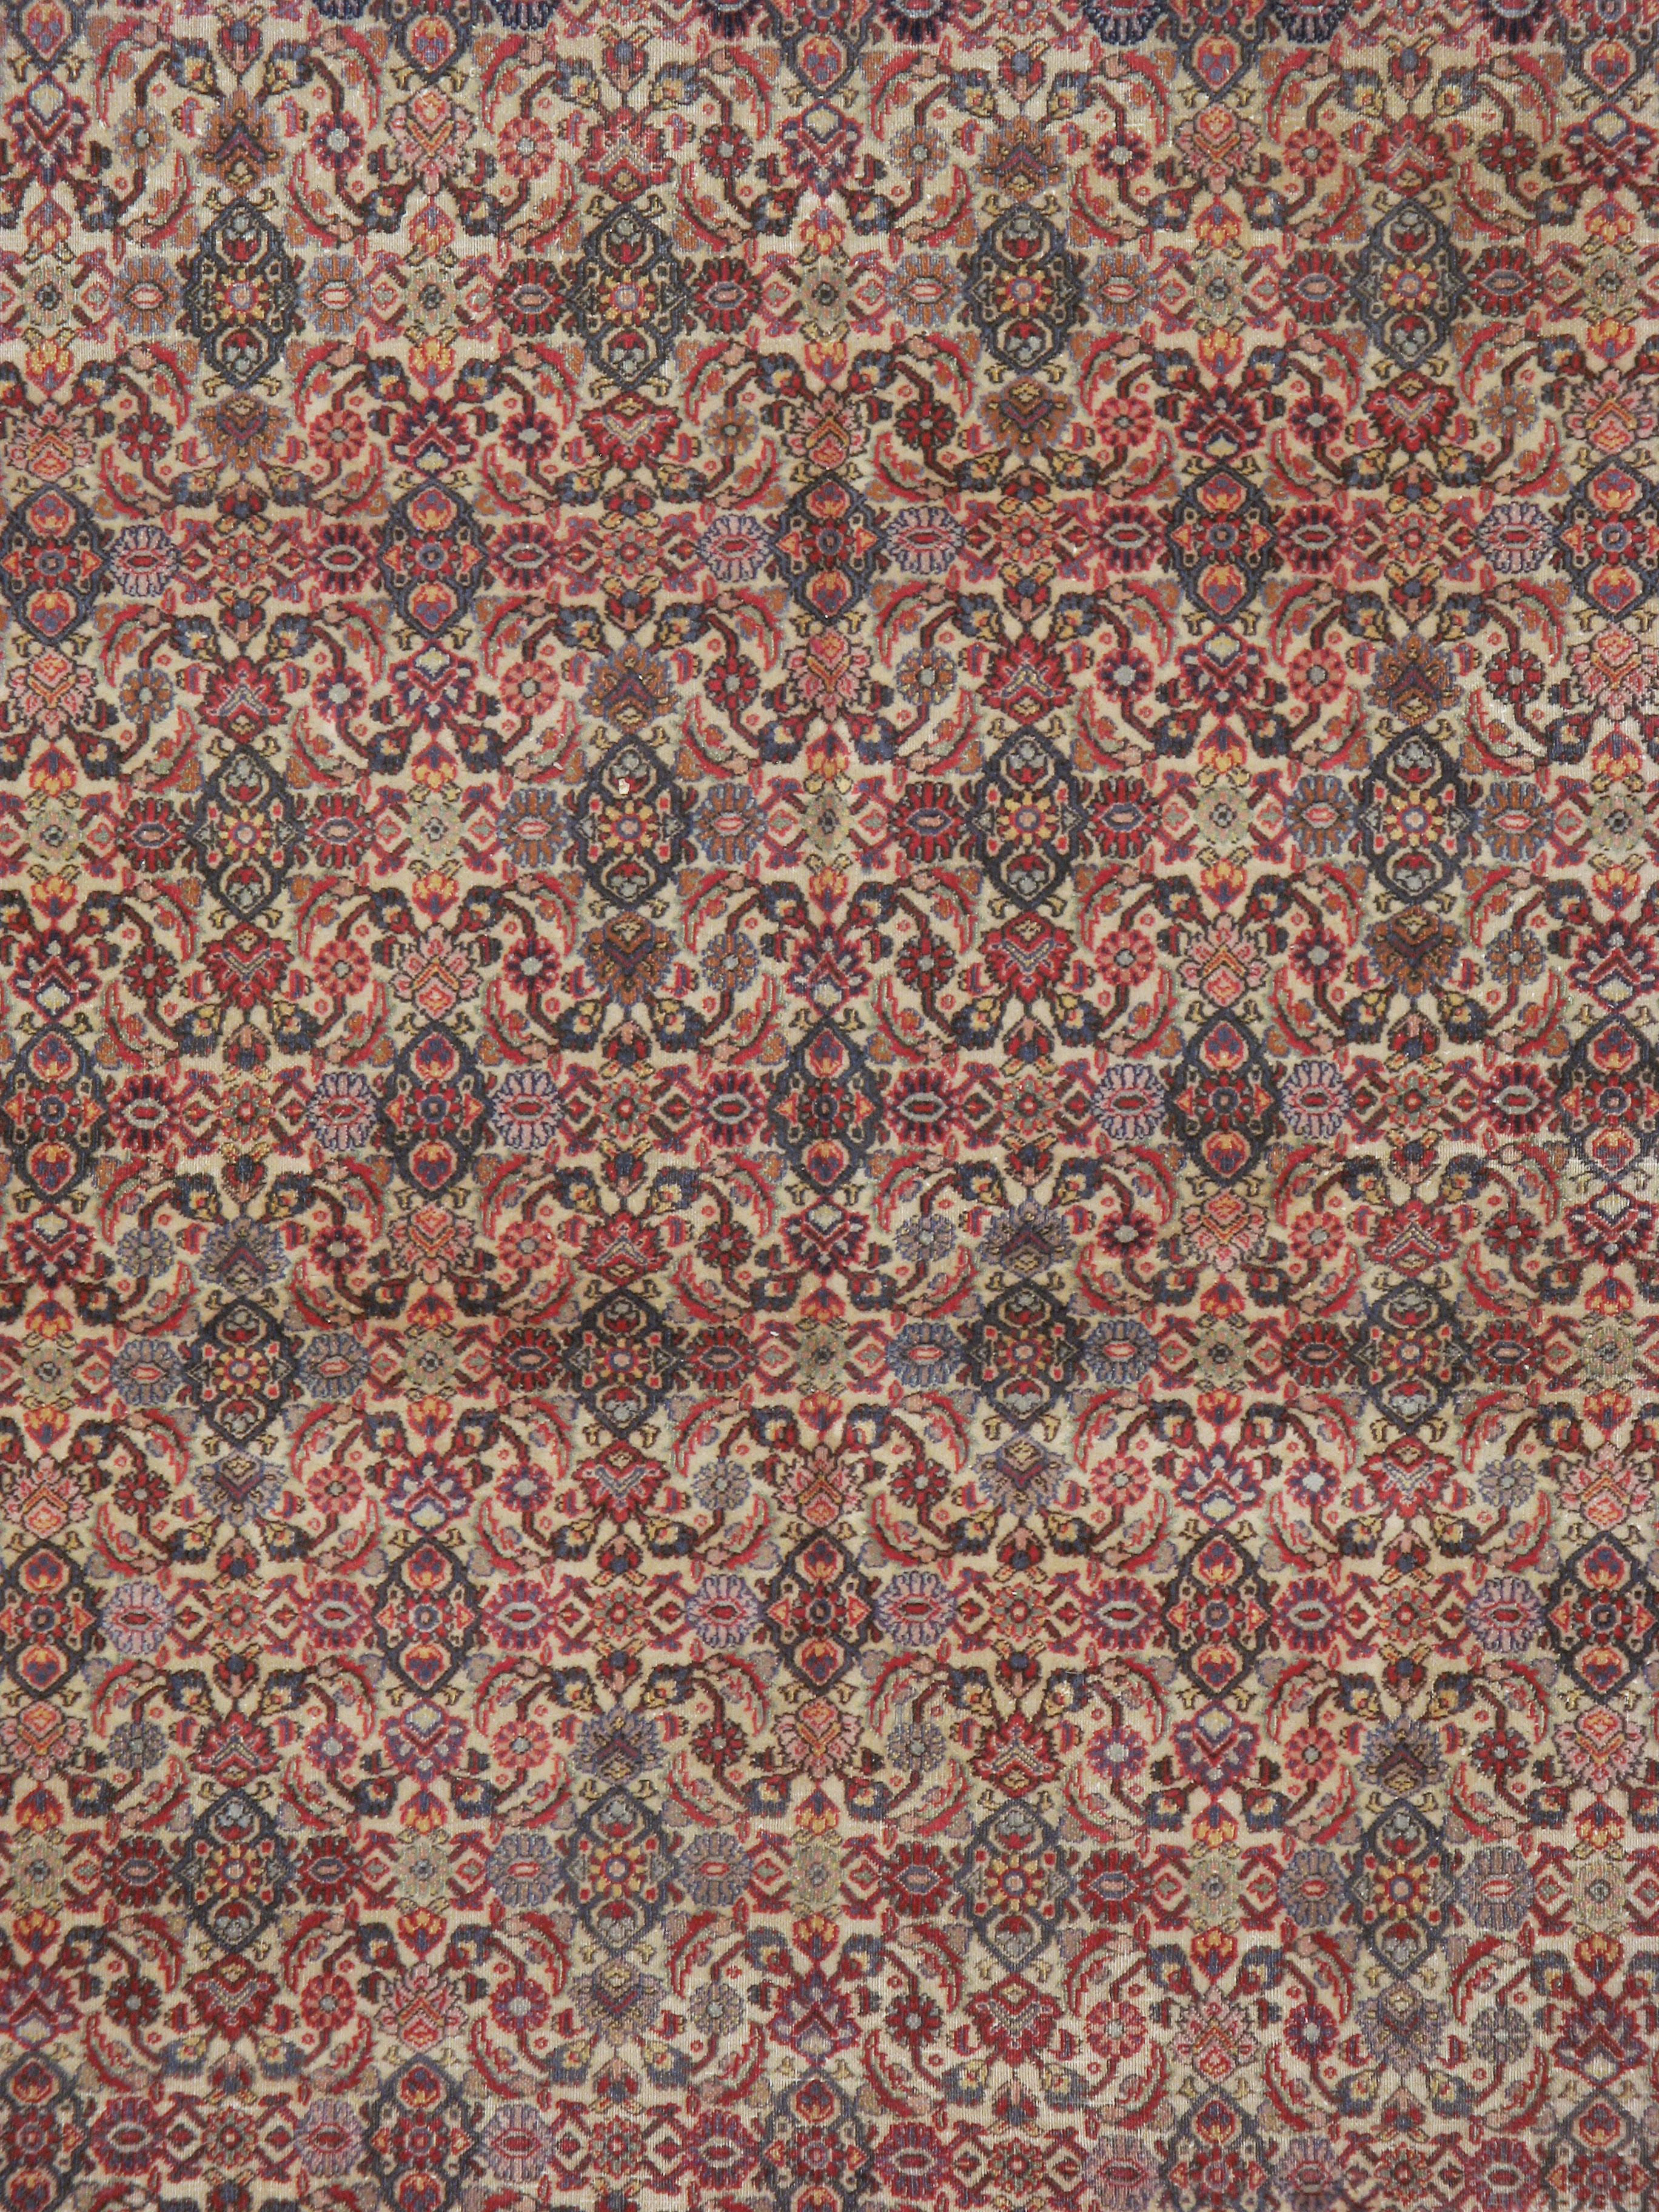 An antique Indian Lahore carpet from the early 20th century.

Measures: 6' 10